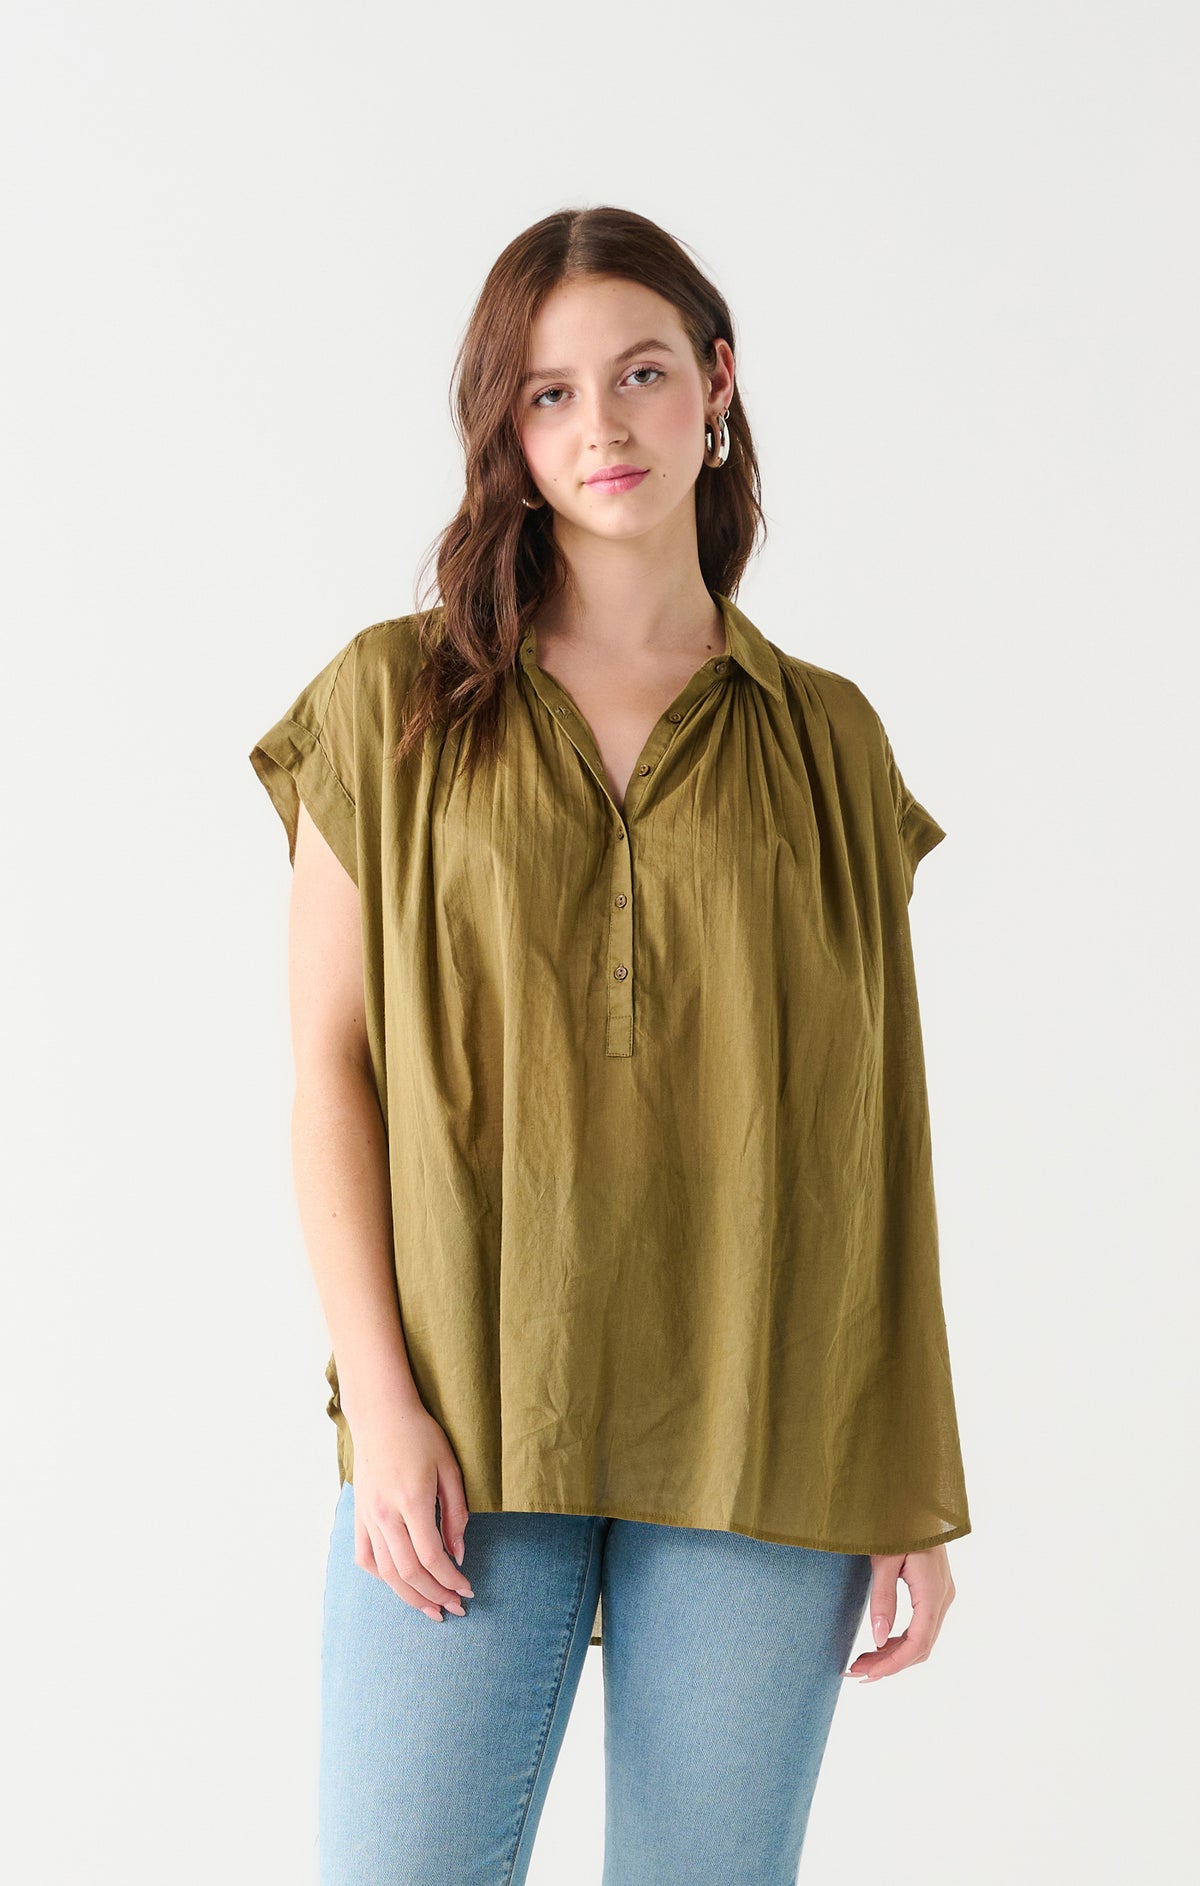 The Bethany Top